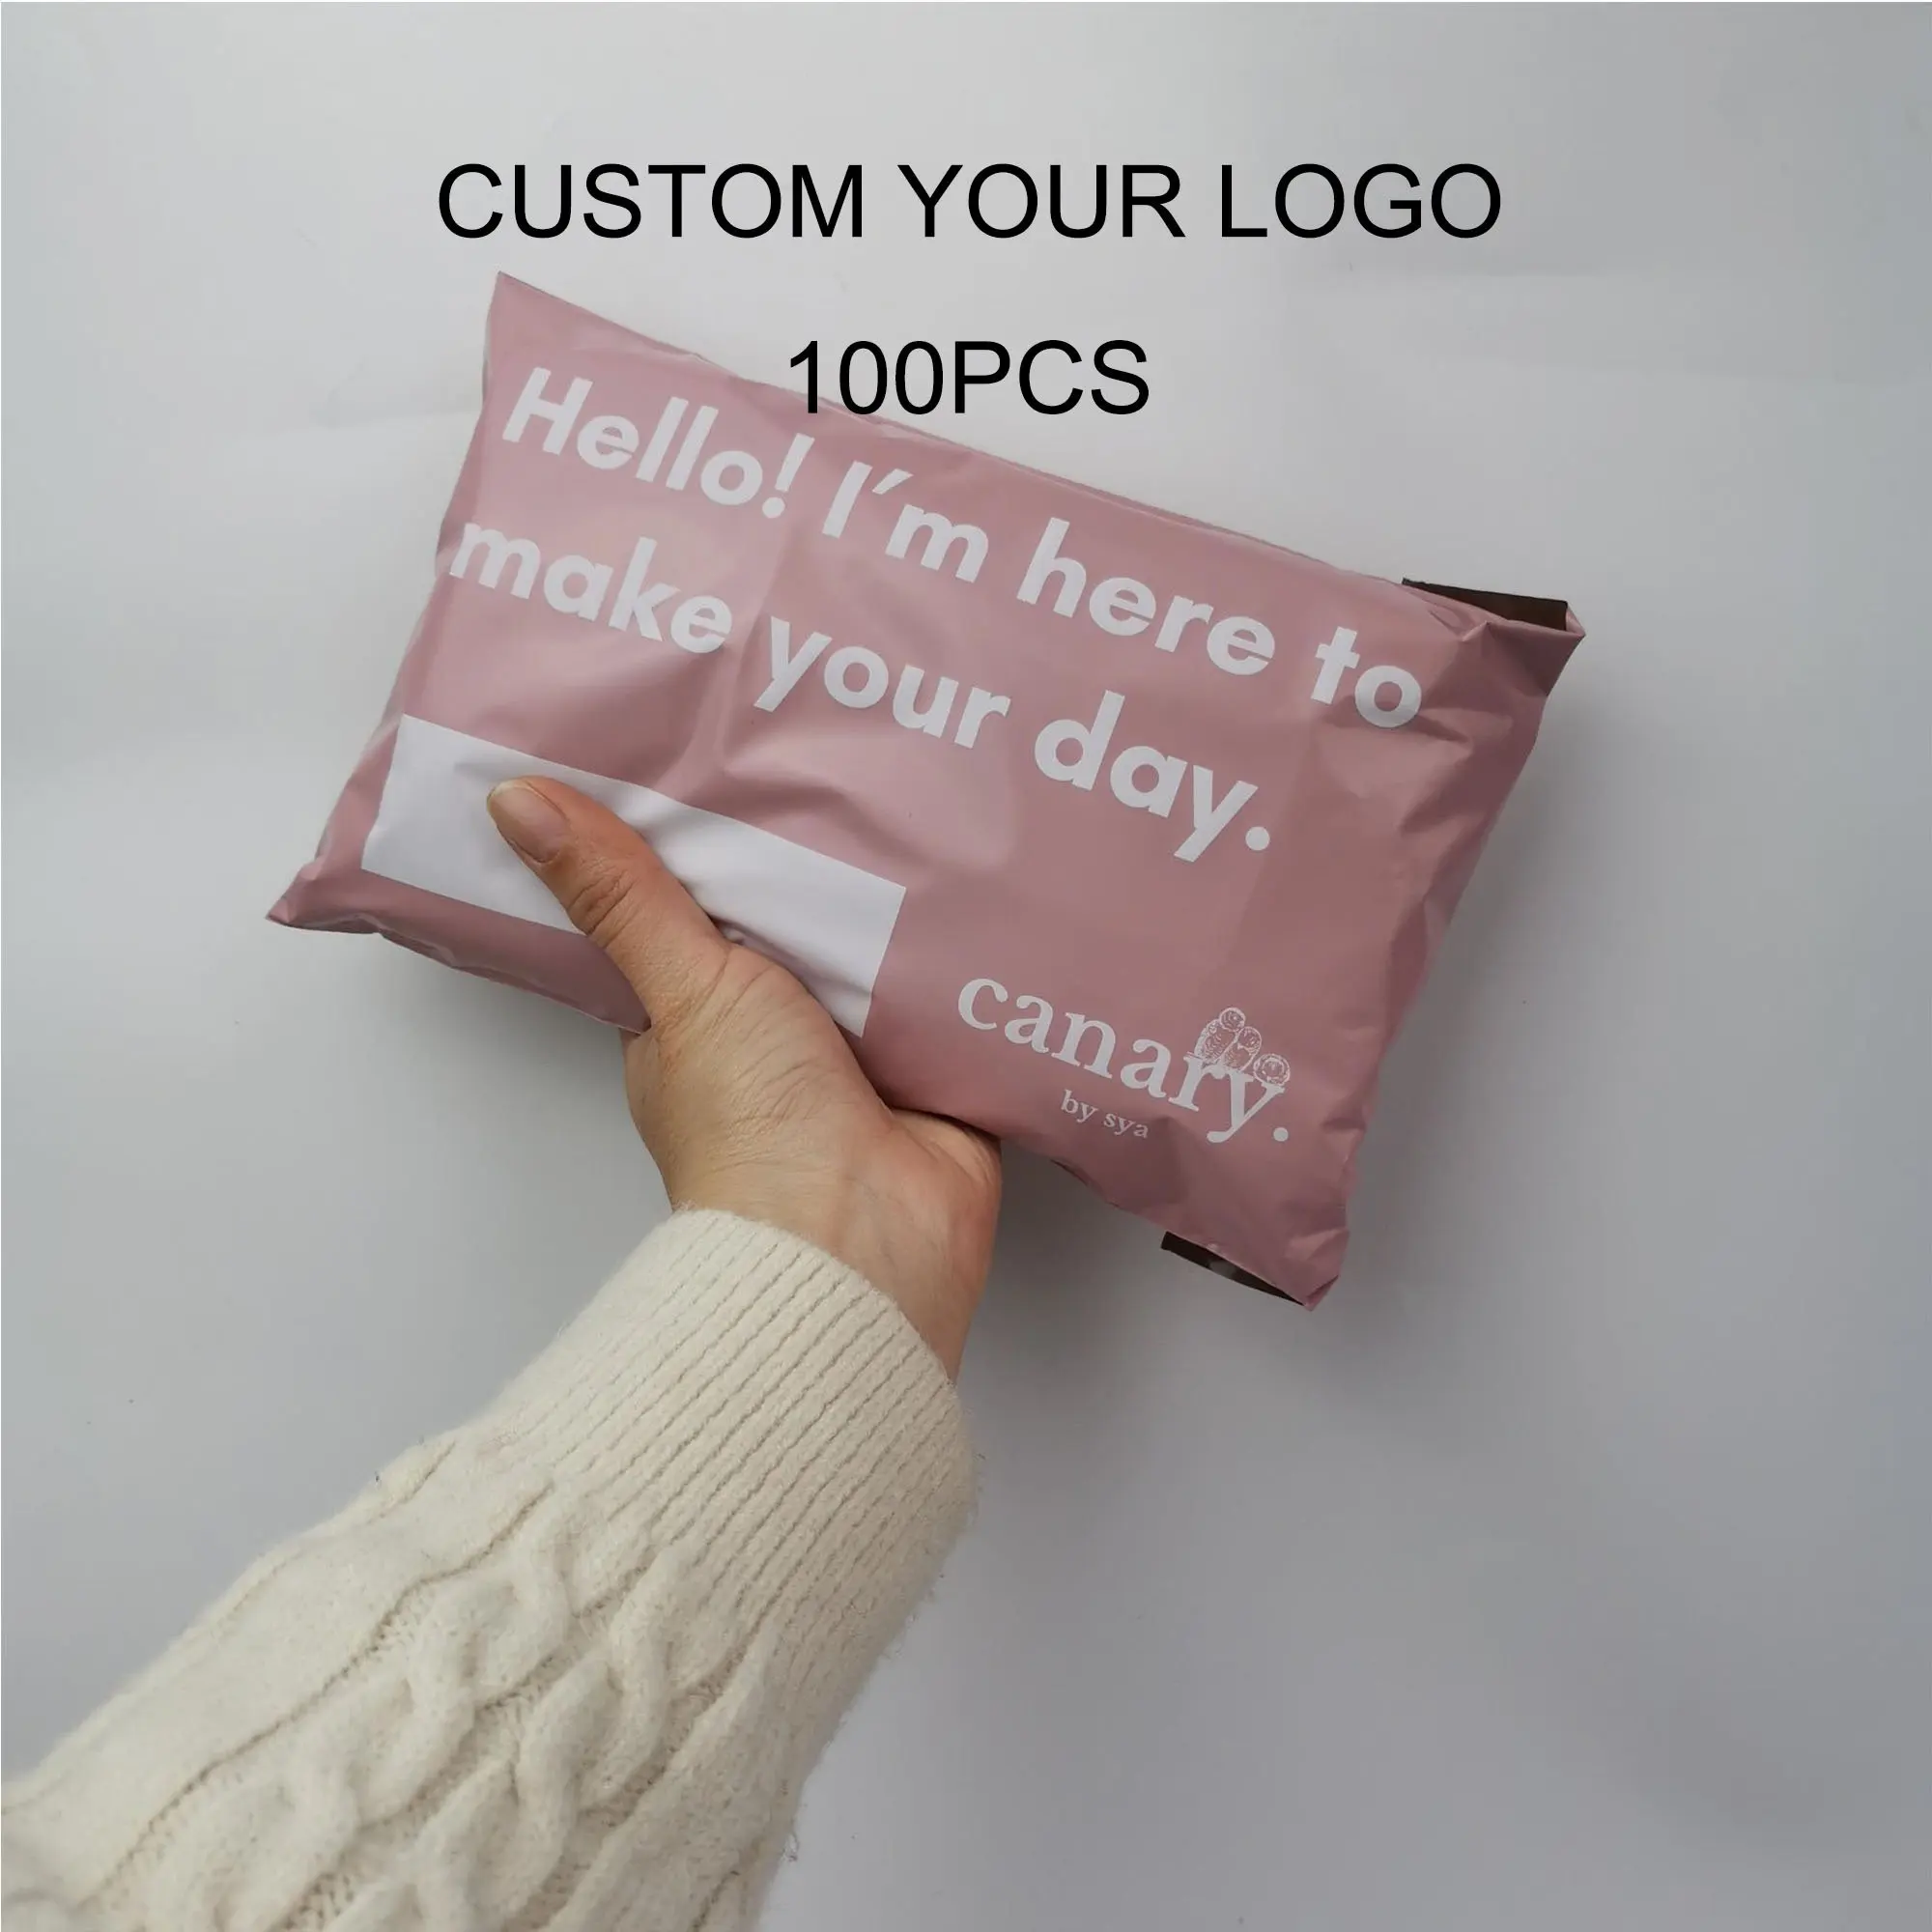 100pcs Customize Your LOGO Rose Gold Poly Mailing Bag Biodegradable Shipping Bags Courier Bags Mailer Bag